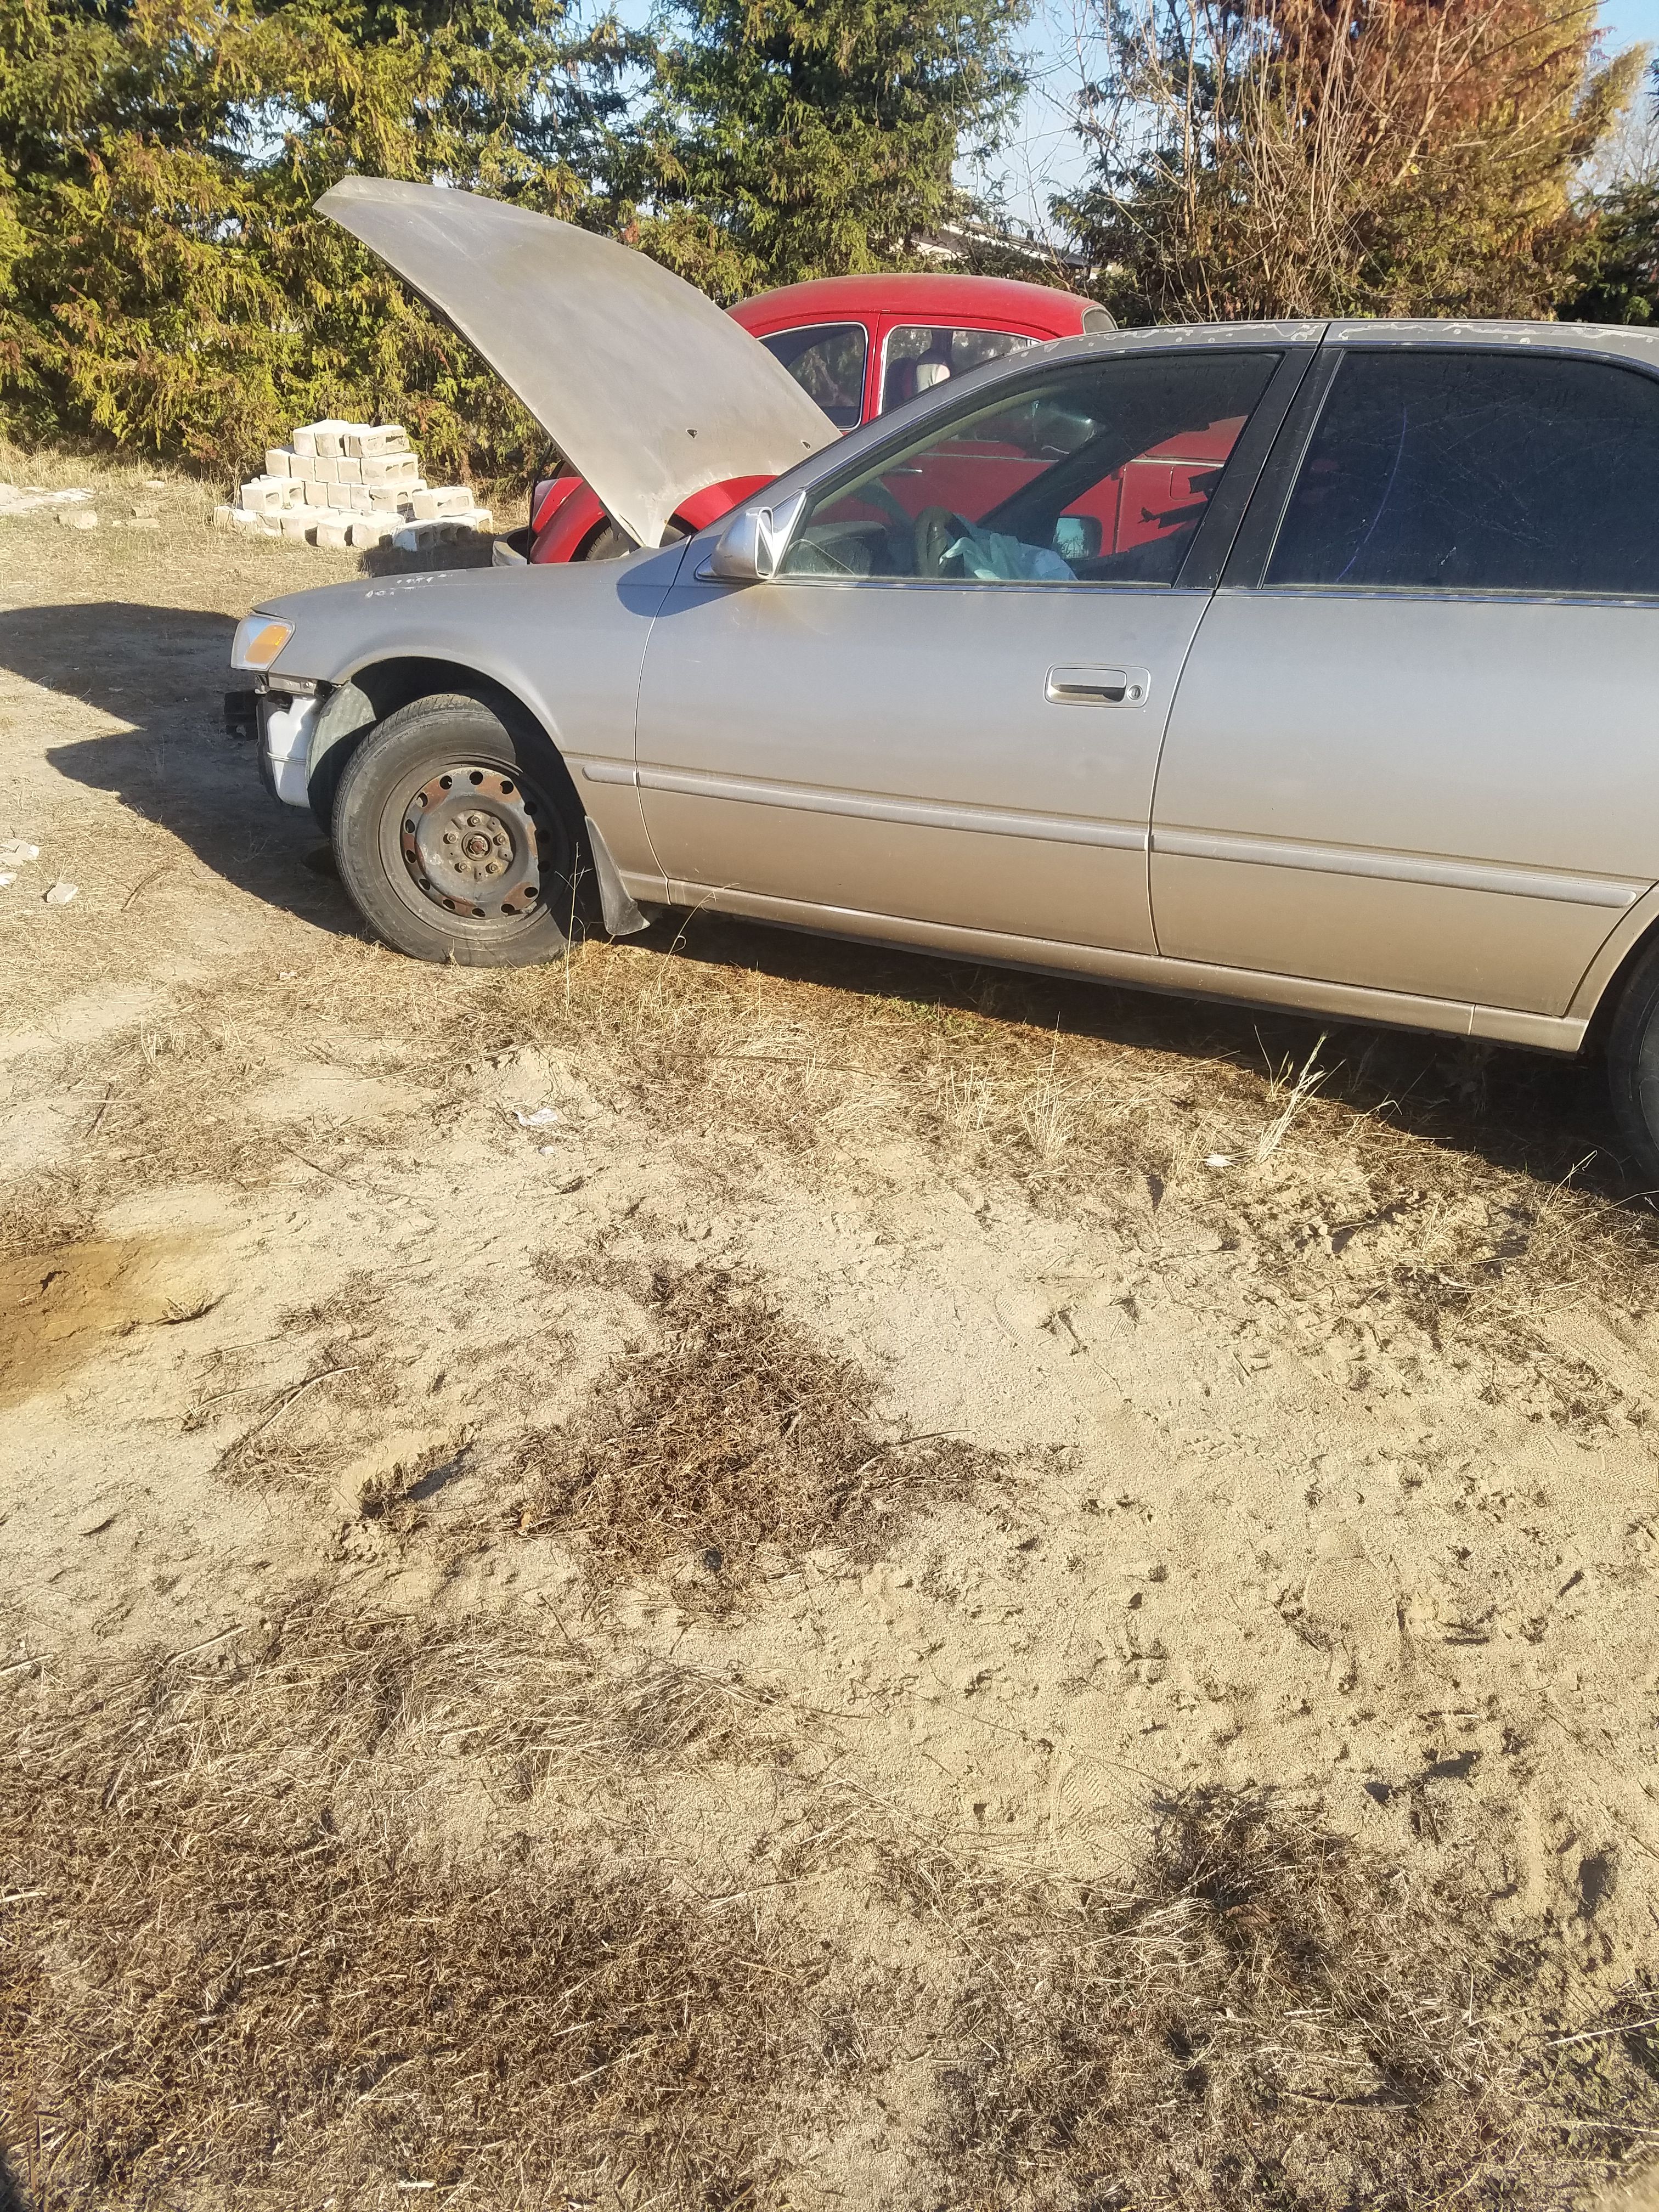 Toyota Camry for sale parts